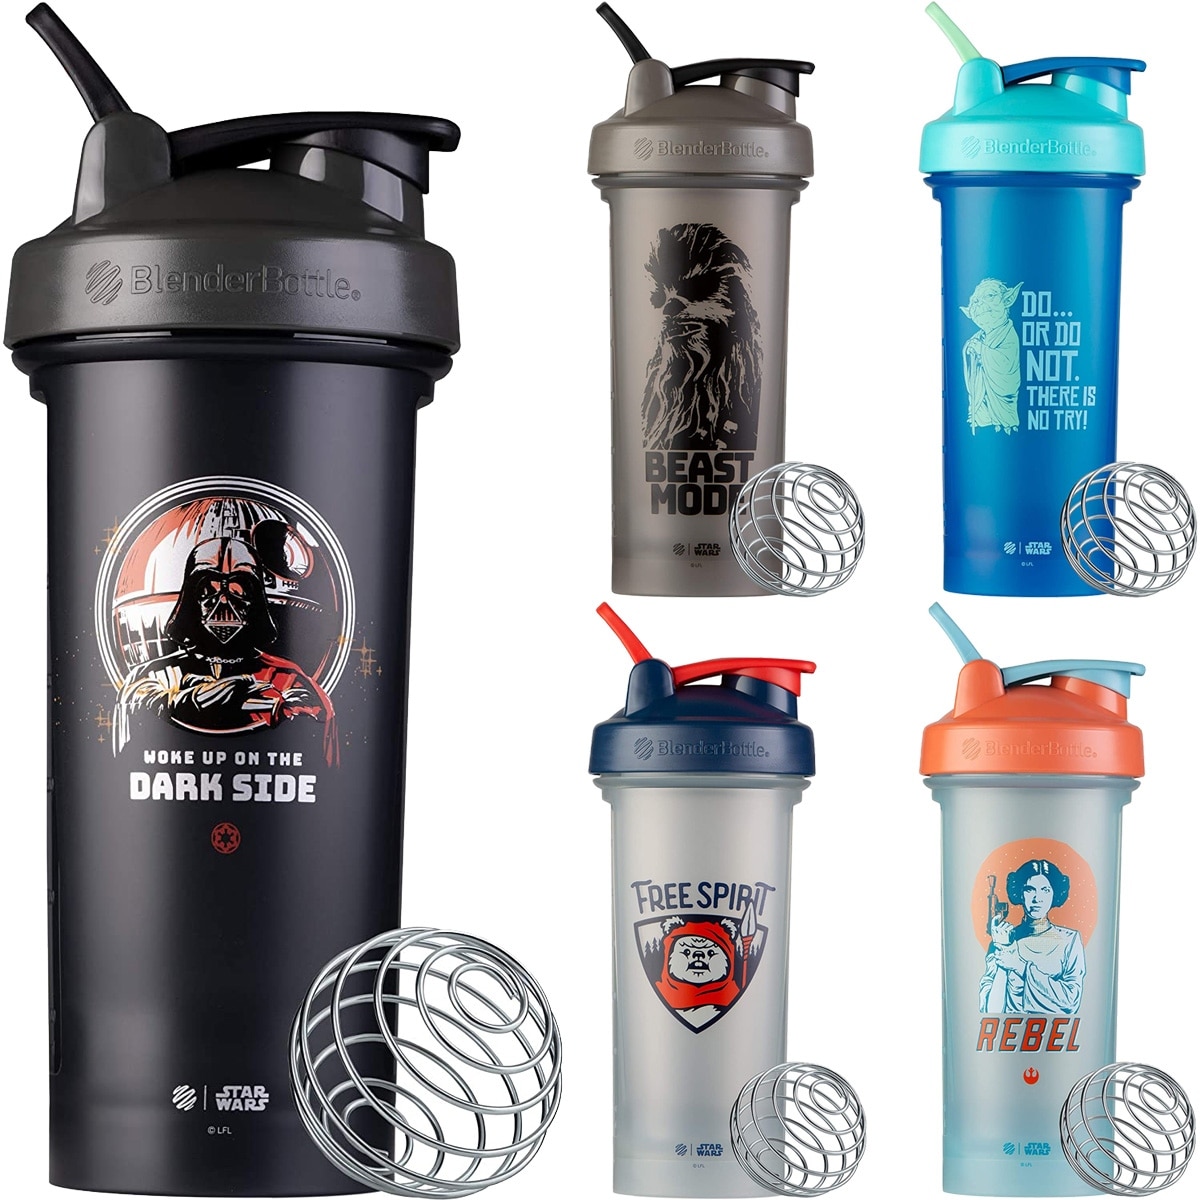 https://ak1.ostkcdn.com/images/products/is/images/direct/c6d13003fd0dd316cbdb2b89775c674debe6d009/Blender-Bottle-Star-Wars-Classic-28-oz.-Shaker-Mixer-Cup-with-Loop-Top.jpg